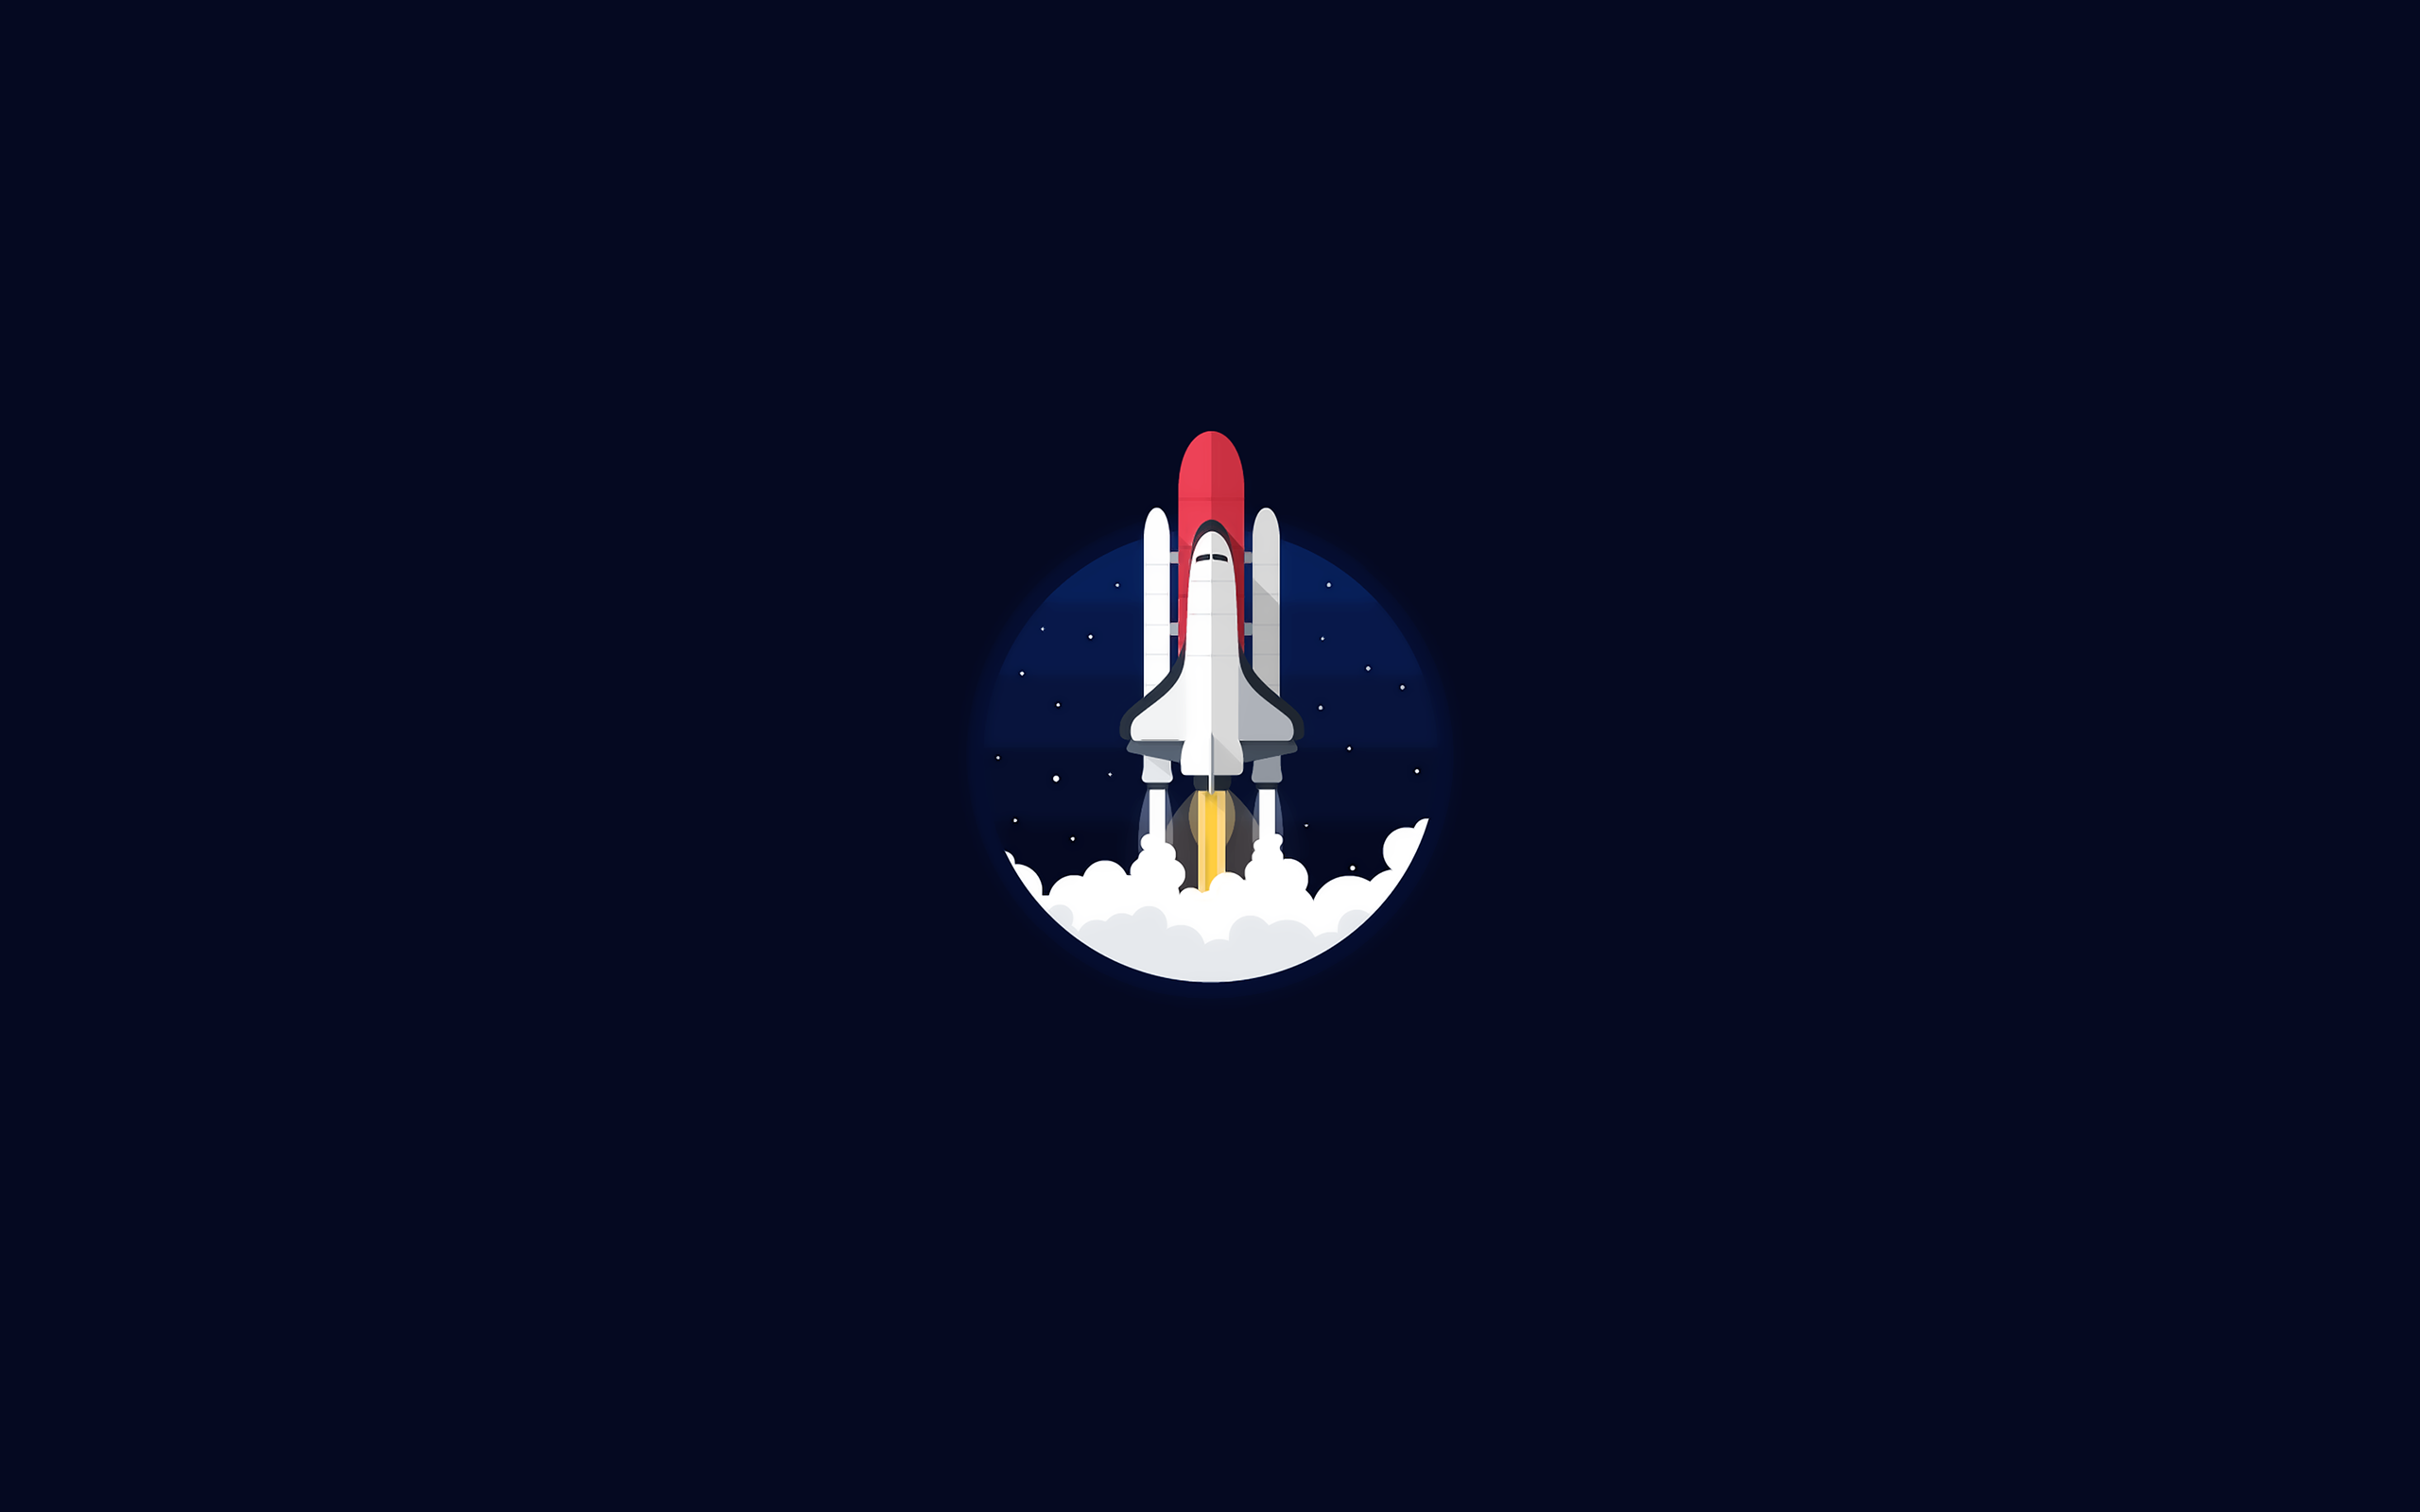 General 2560x1600 space shuttle minimalism artwork space art vehicle simple background space blue background